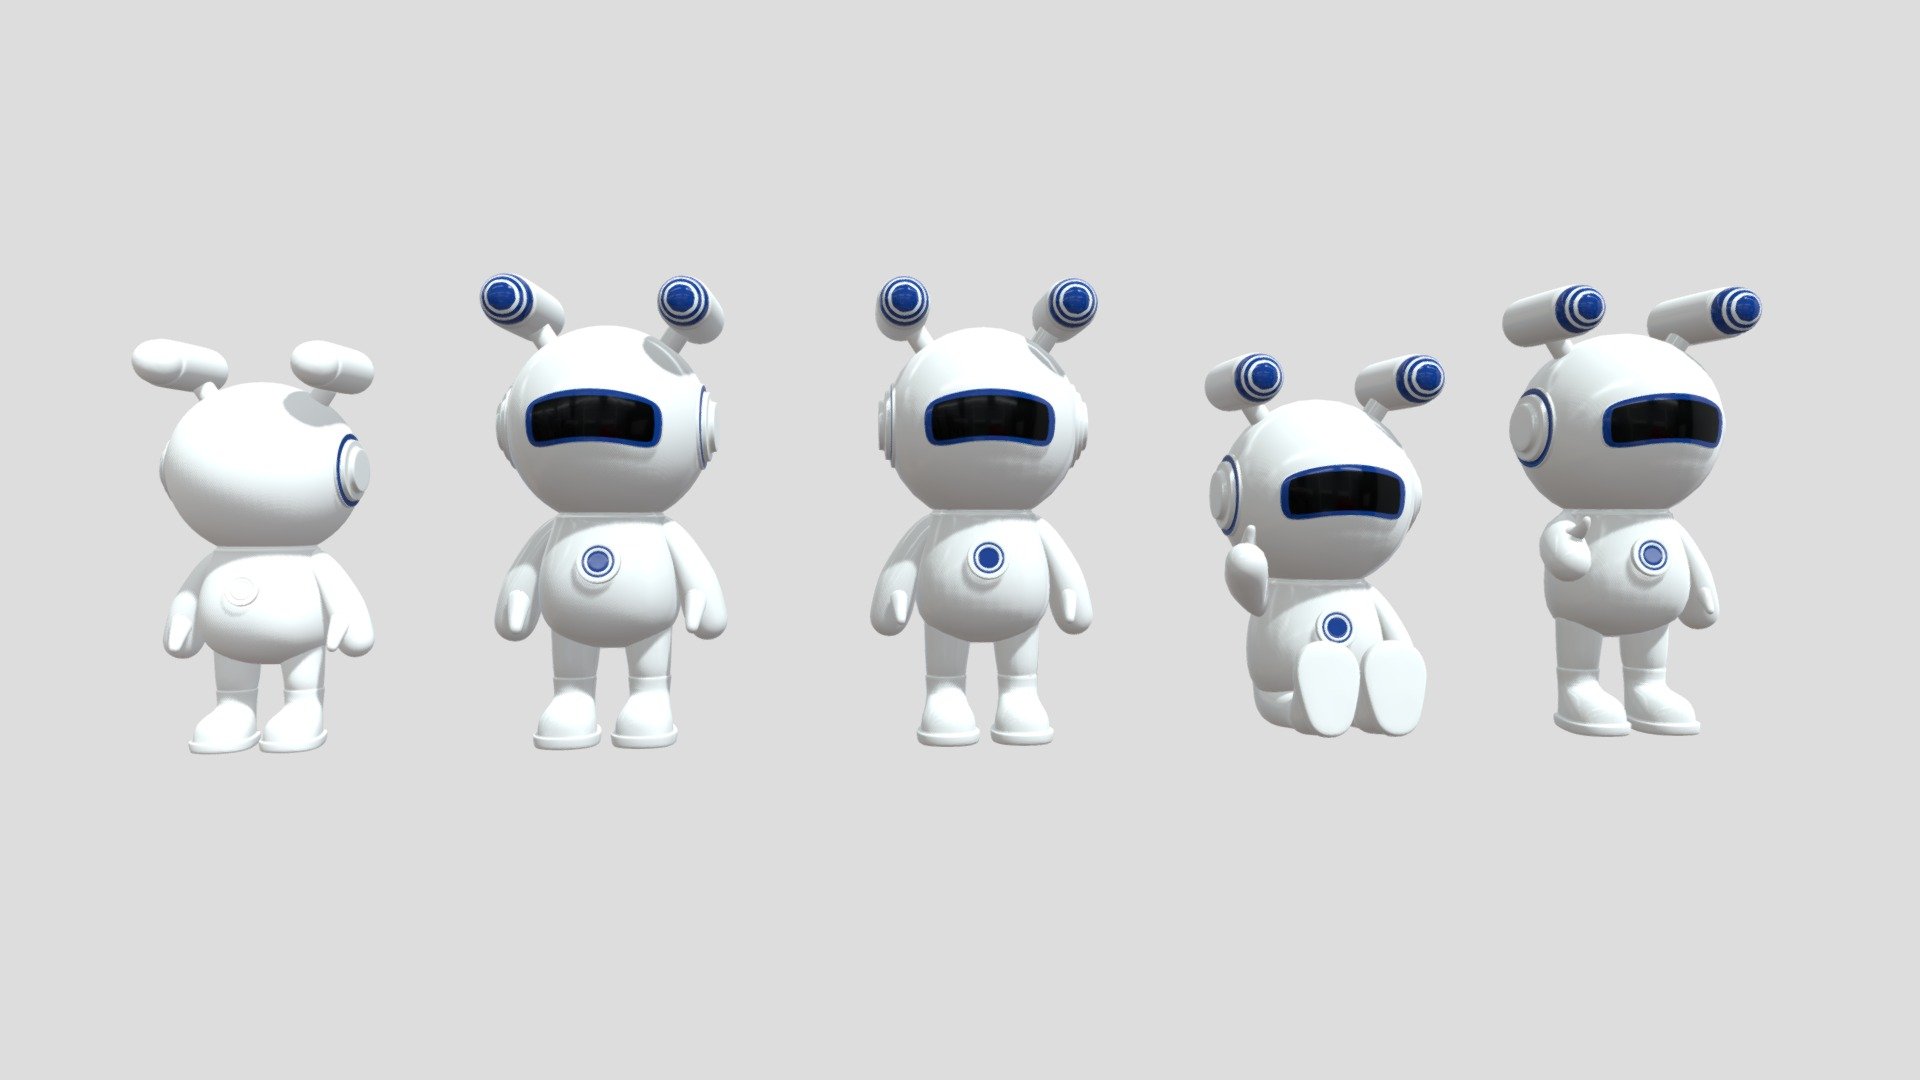 This is a cartoon model of a crew of astronauts - Robot astronuat space cartoon - 3D model by cha-xiao-shi 3d model